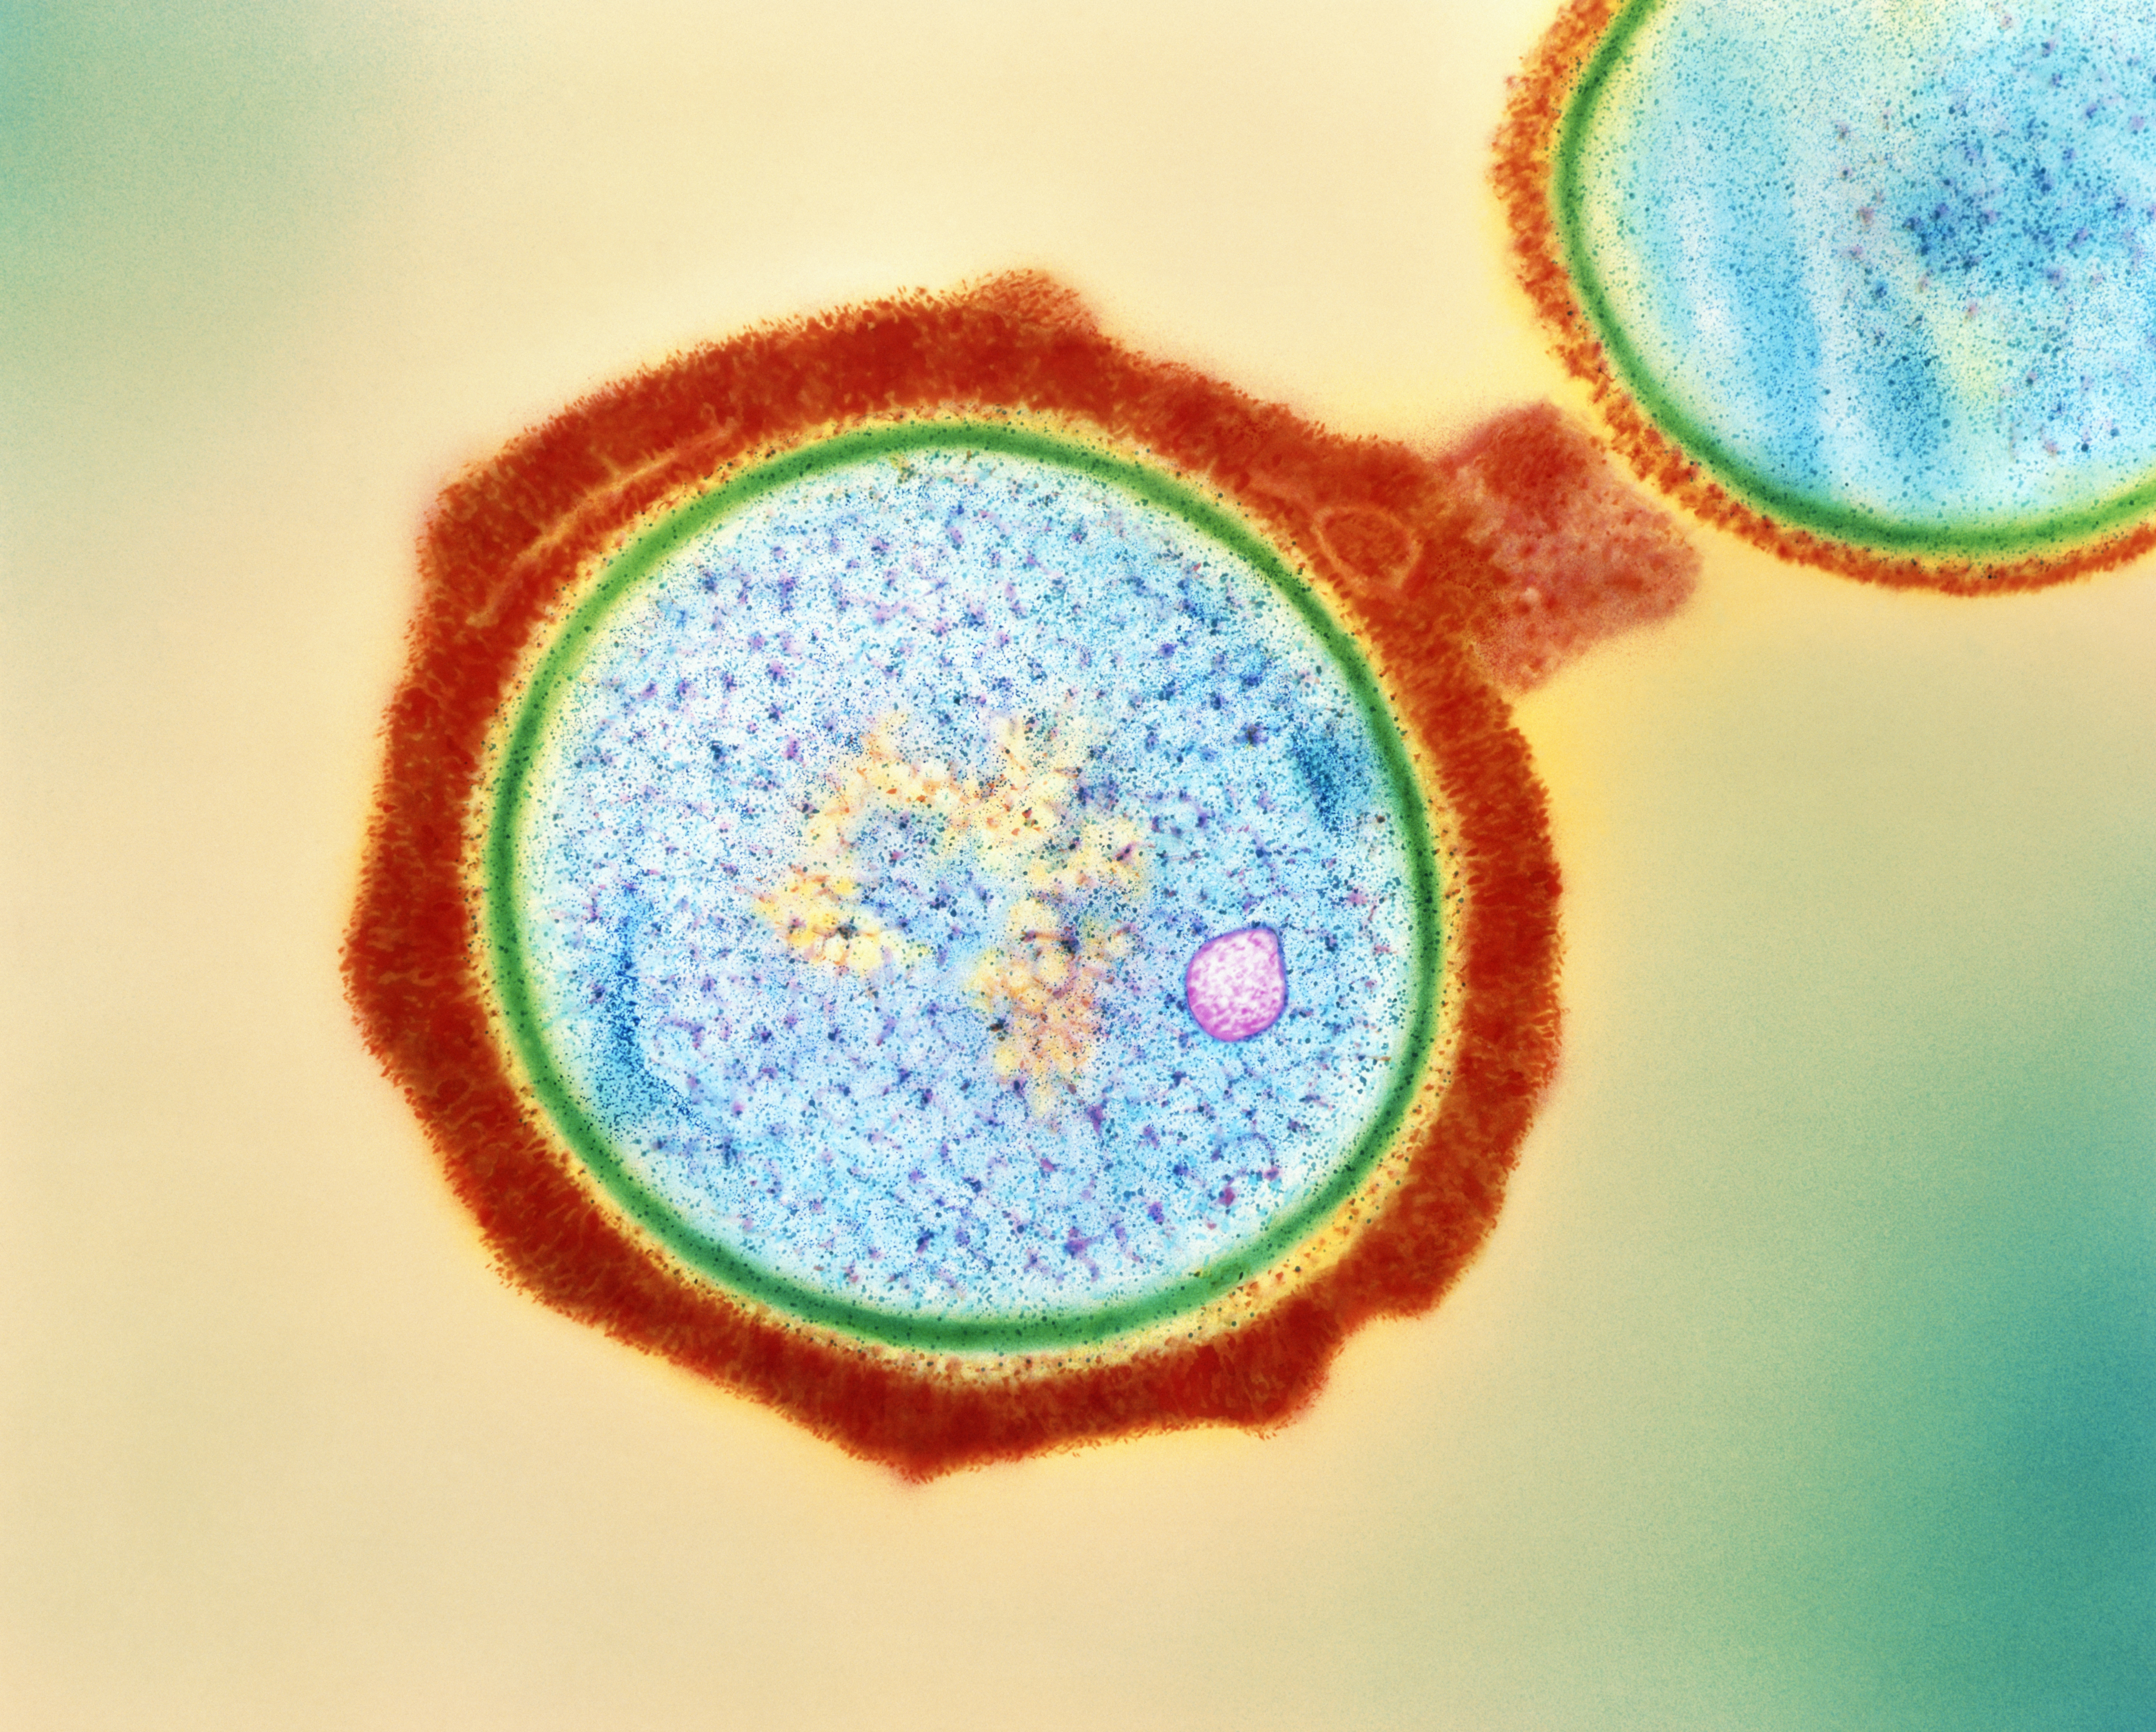 Infections caused by MRSA bacteria (pictured) can lead to serious health complications. Lysins kill the microbe by destroying the bacterium’s cell wall (green).